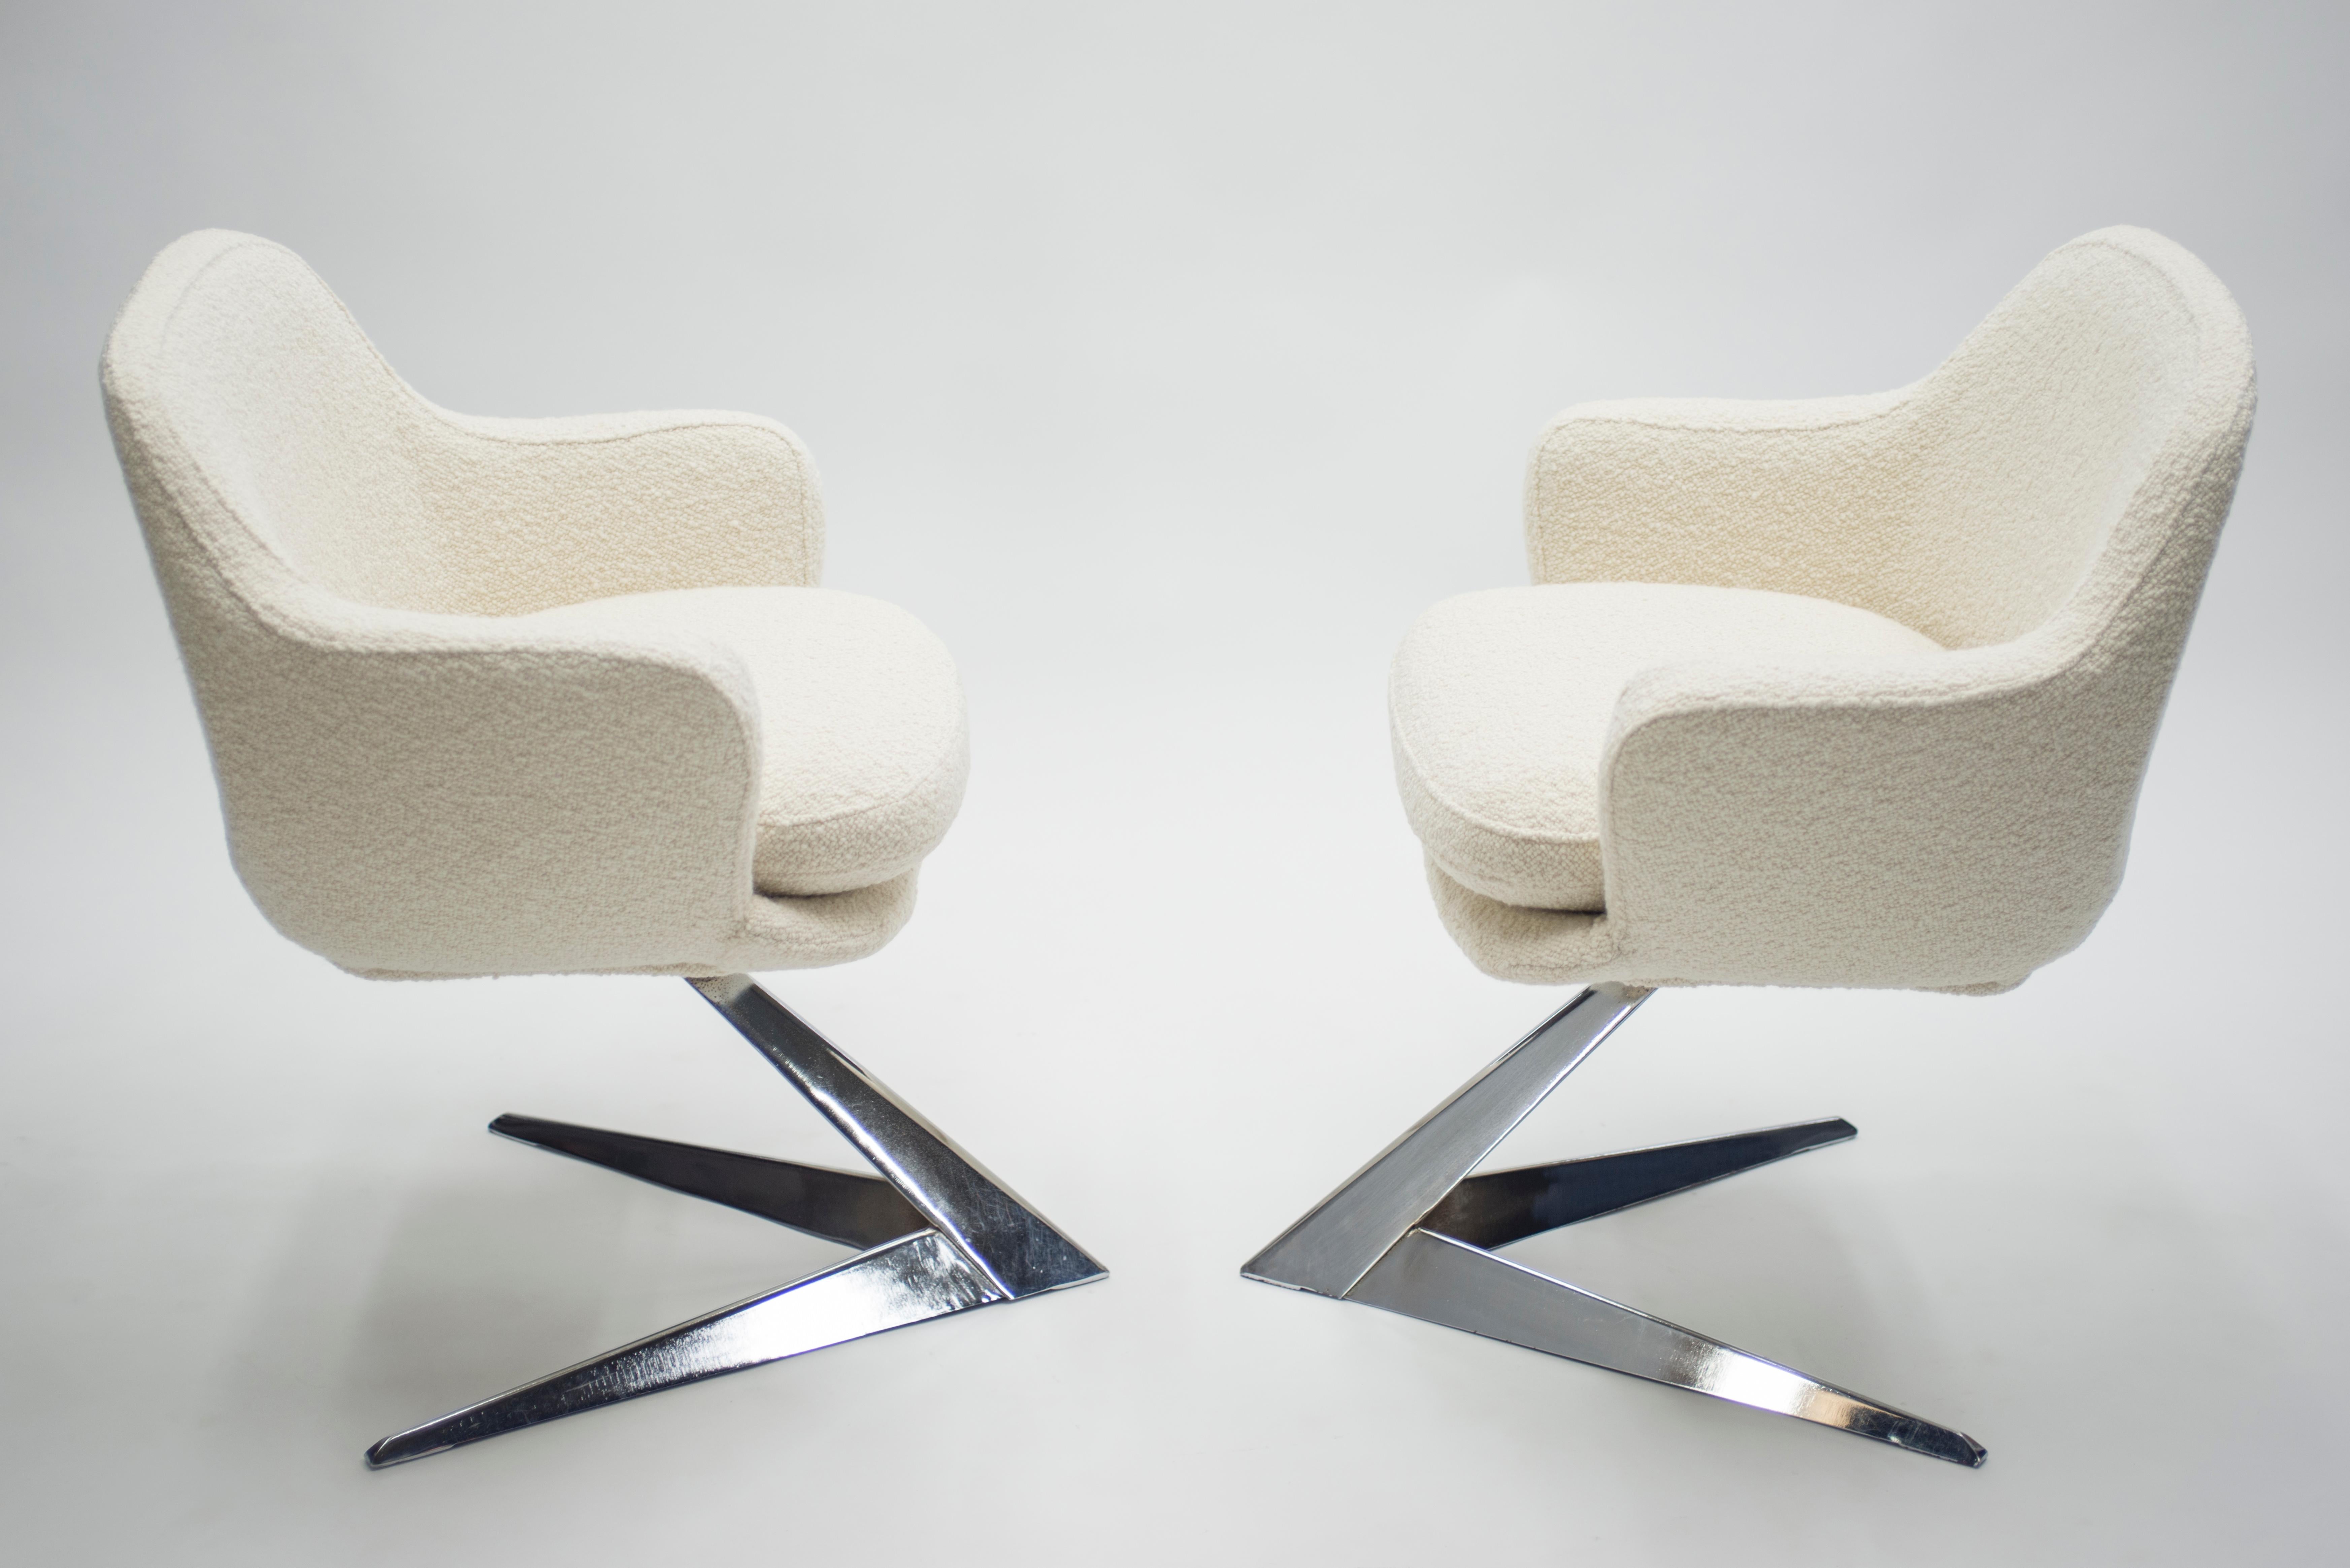 If the distinctive aerodynamic, triangular base in this pair of midcentury armchairs feels familiar, it may be because it potentially inspired the iconic Concorde passenger airliner, one of only a couple of supersonic aircrafts that ever flew